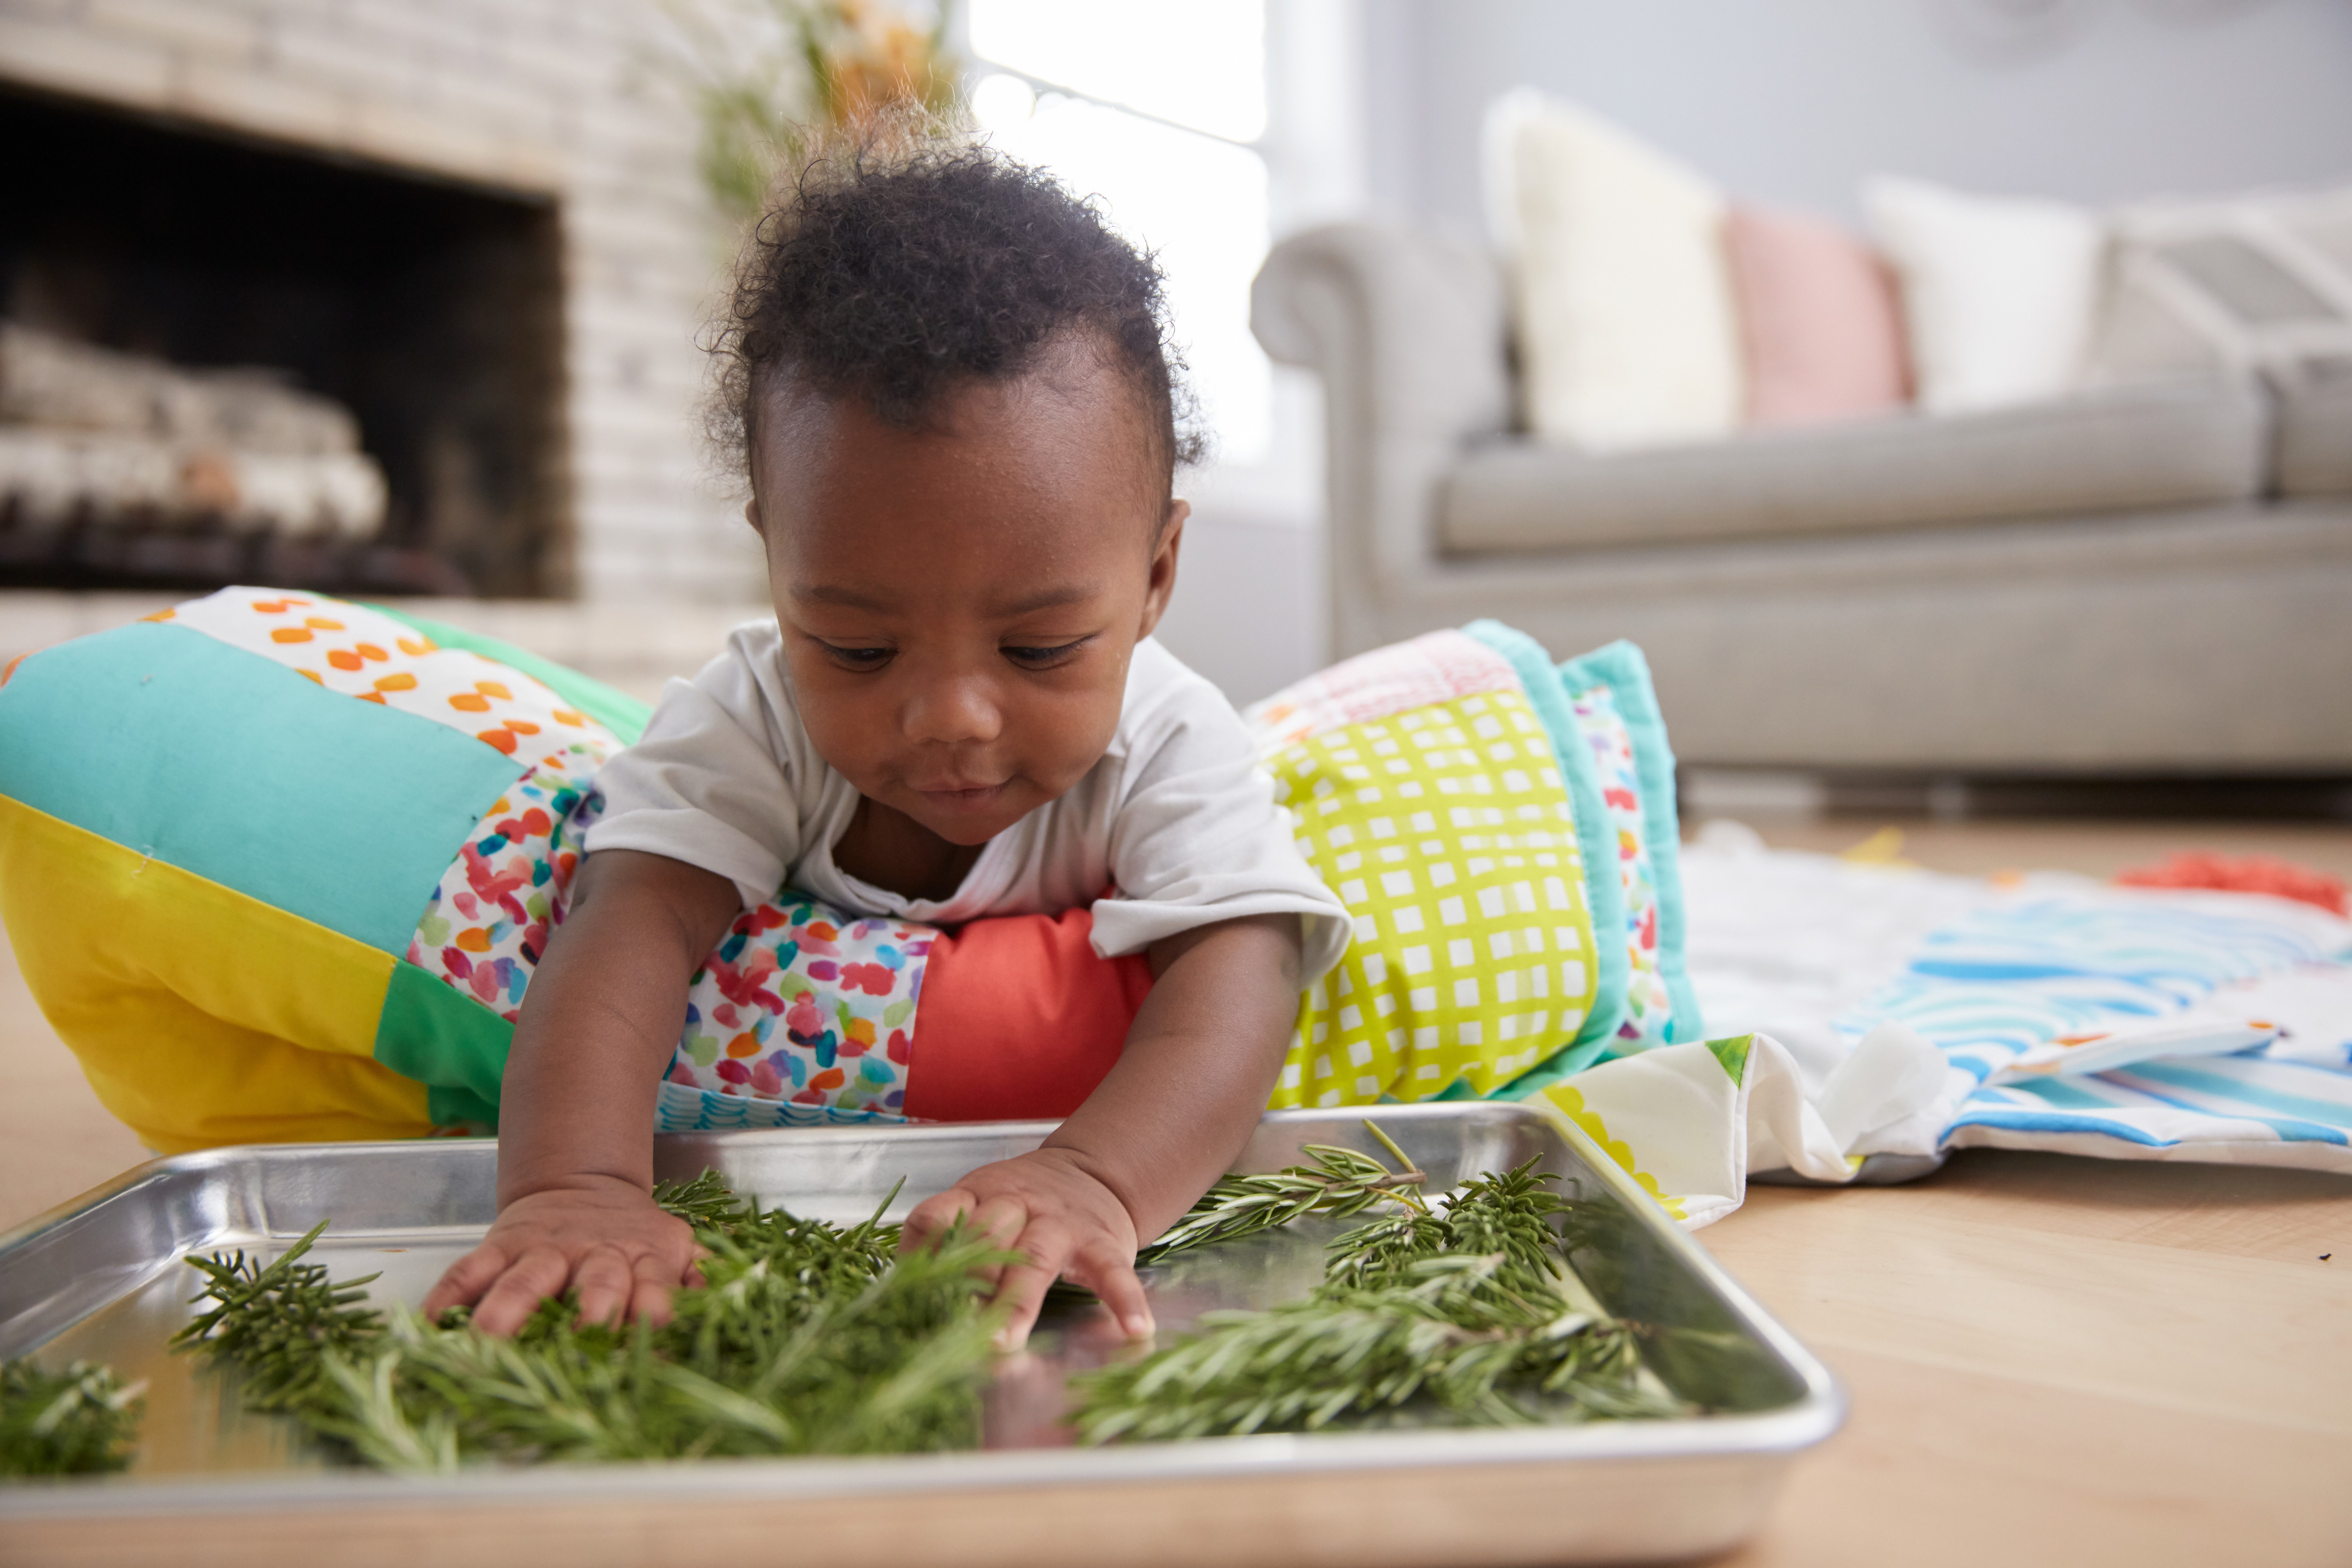 Activities for your 4-month-old from child development experts